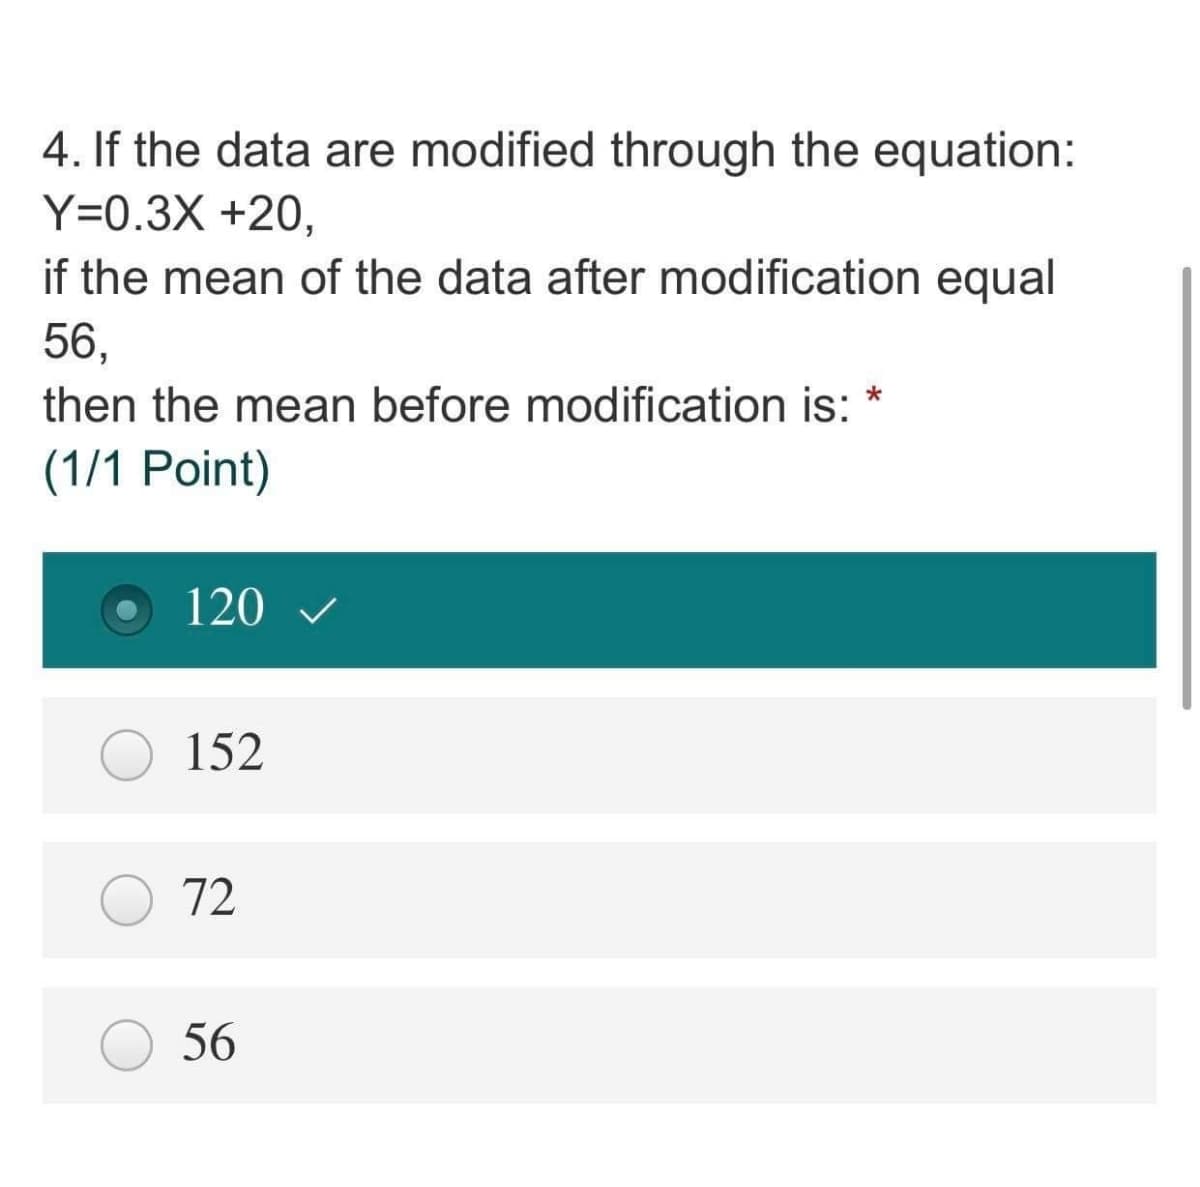 4. If the data are modified through the equation:
Y=0.3X +20,
if the mean of the data after modification equal
56,
then the mean before modification is: *
(1/1 Point)
120 v
152
72
56
